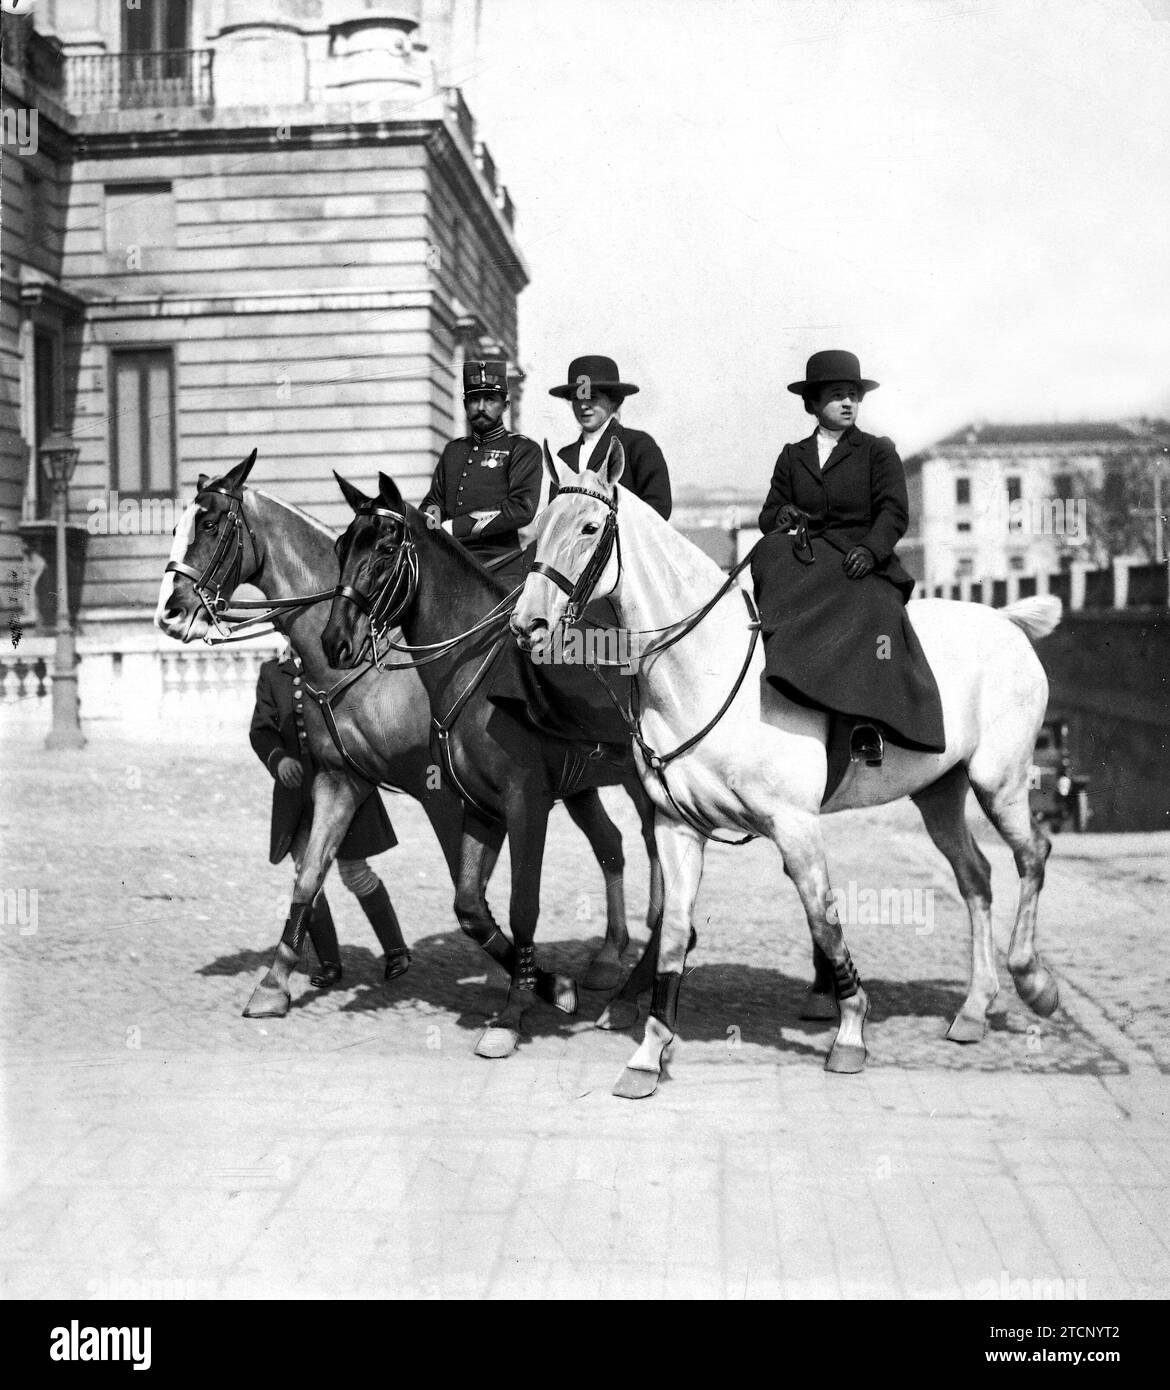 12/31/1912. Back to the Royal Palace. Archduchess Elizabeth Mary and Princess Beatrice, accompanied by HM's chief picador, Mr. Corona, entering the palace upon returning from a horseback ride. Credit: Album / Archivo ABC / Francisco Goñi Stock Photo